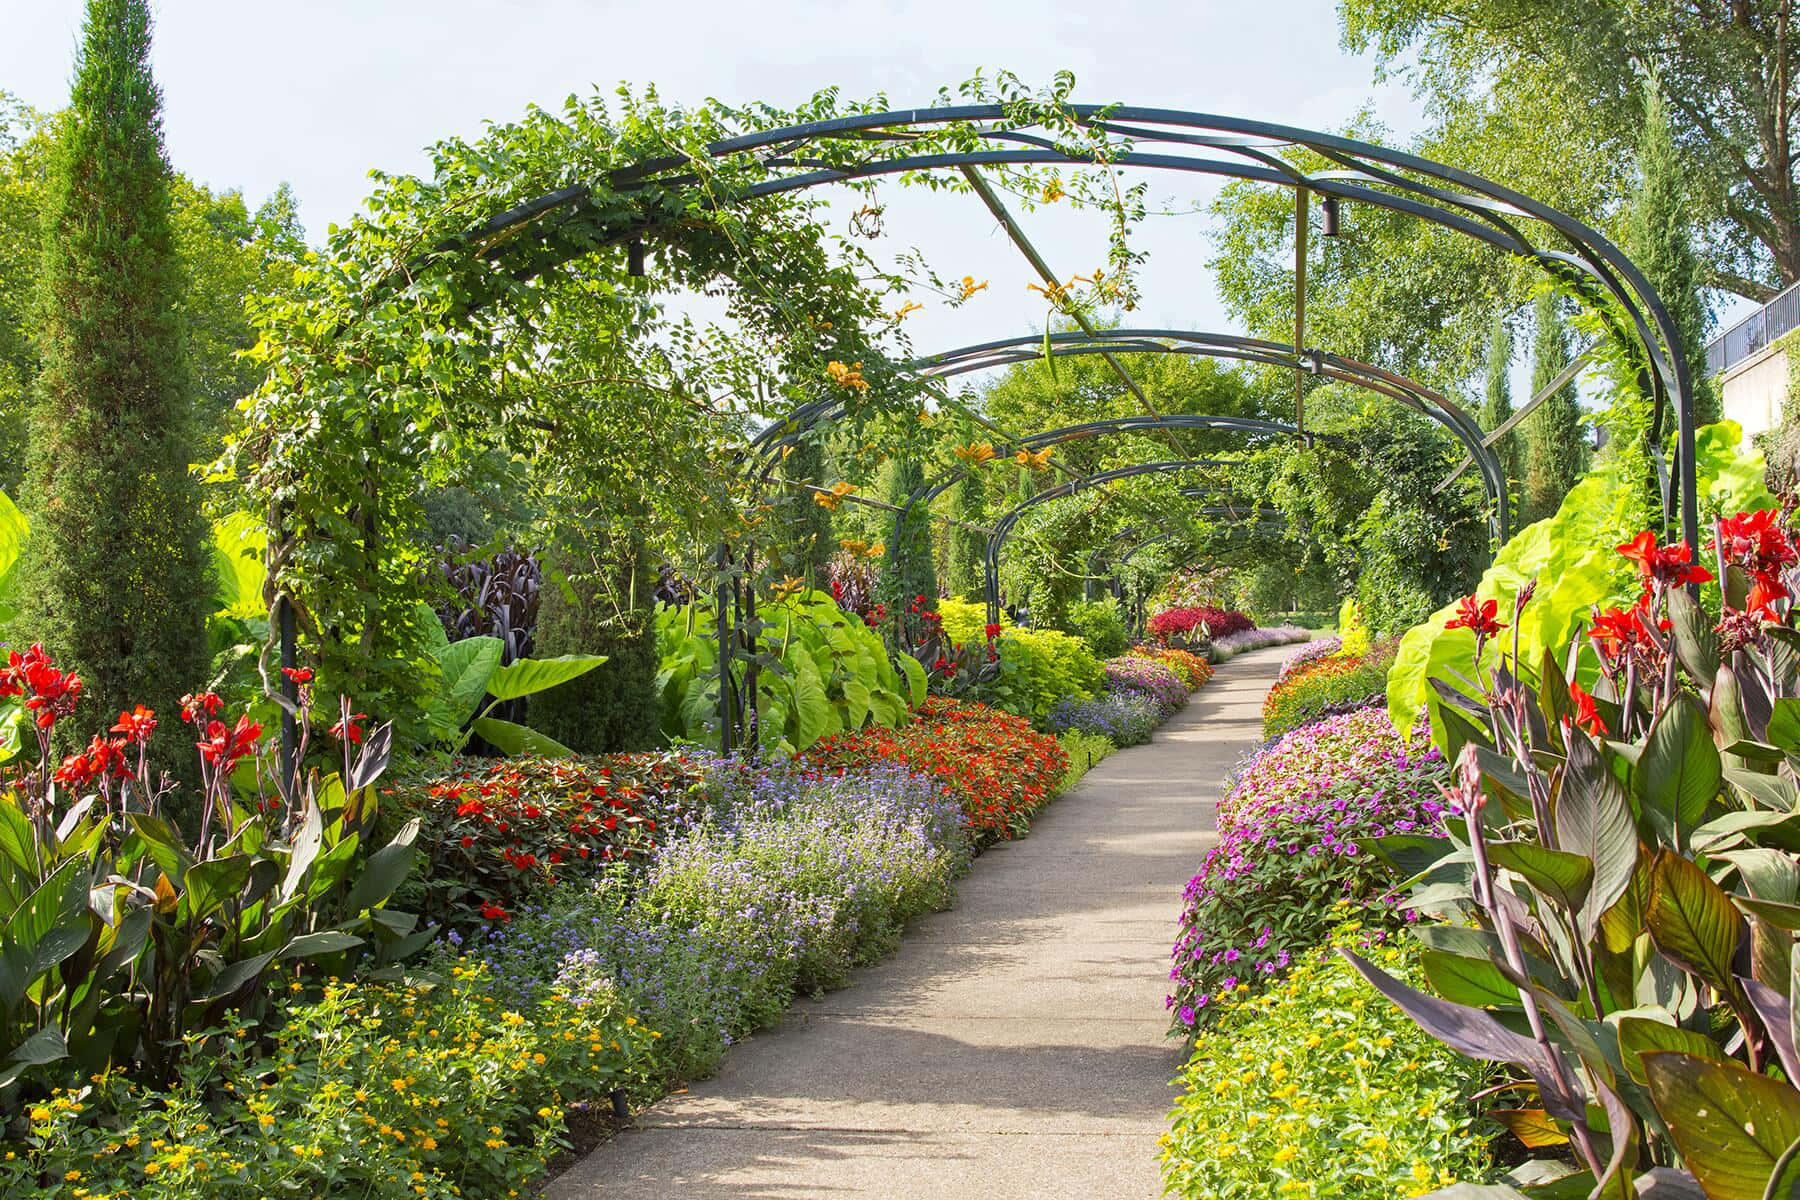 Experience the beauty of a blossoming garden